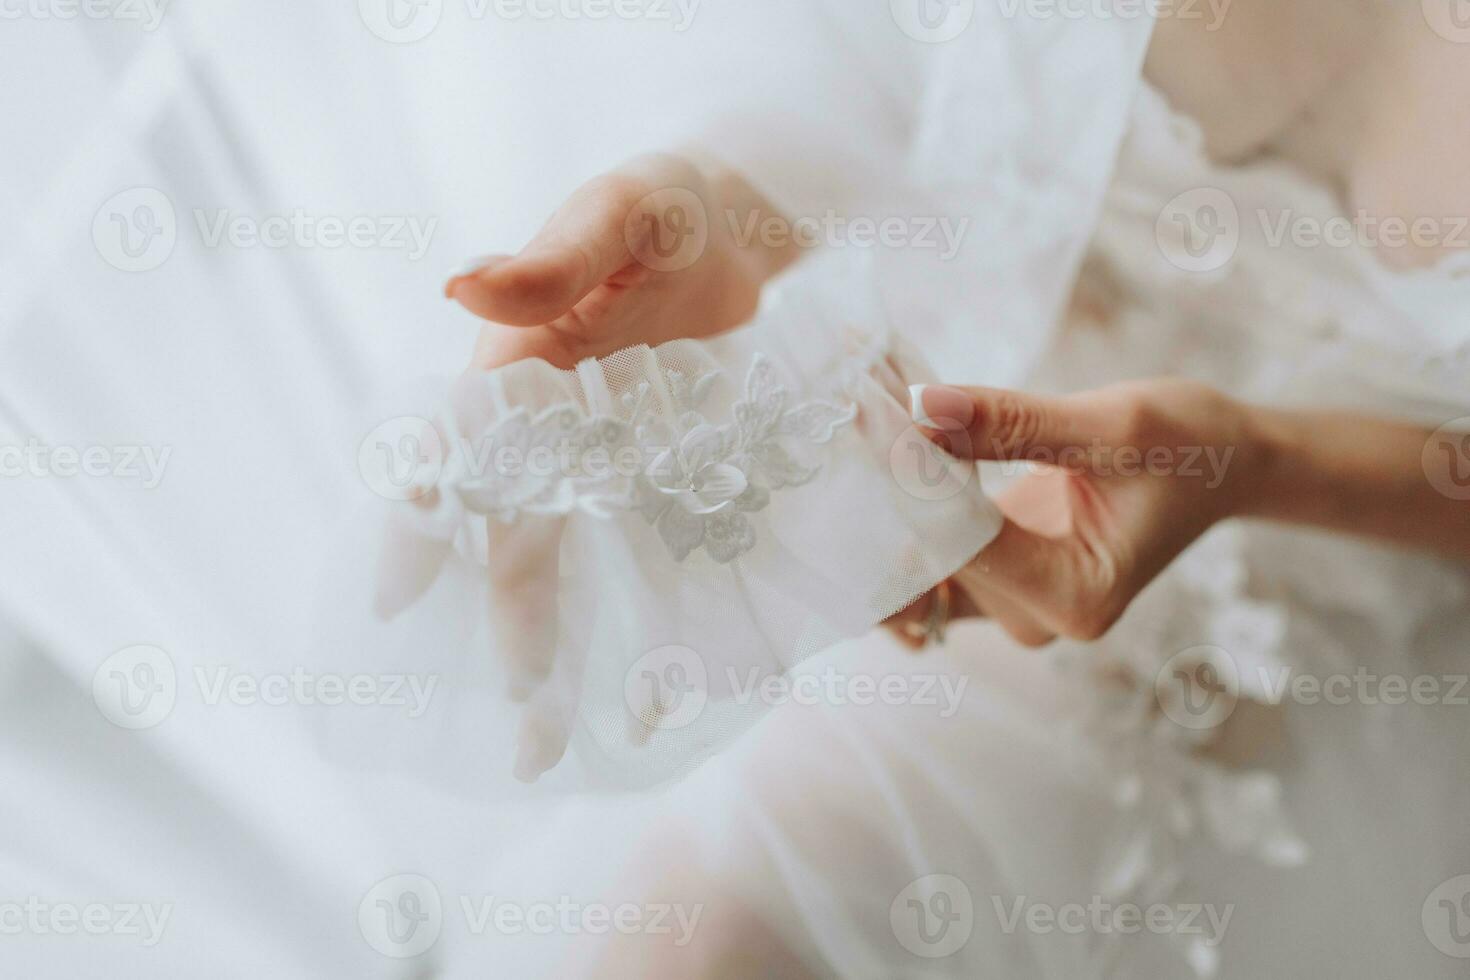 the bride with a French manicure holds a white garter in her hands. Close-up photo